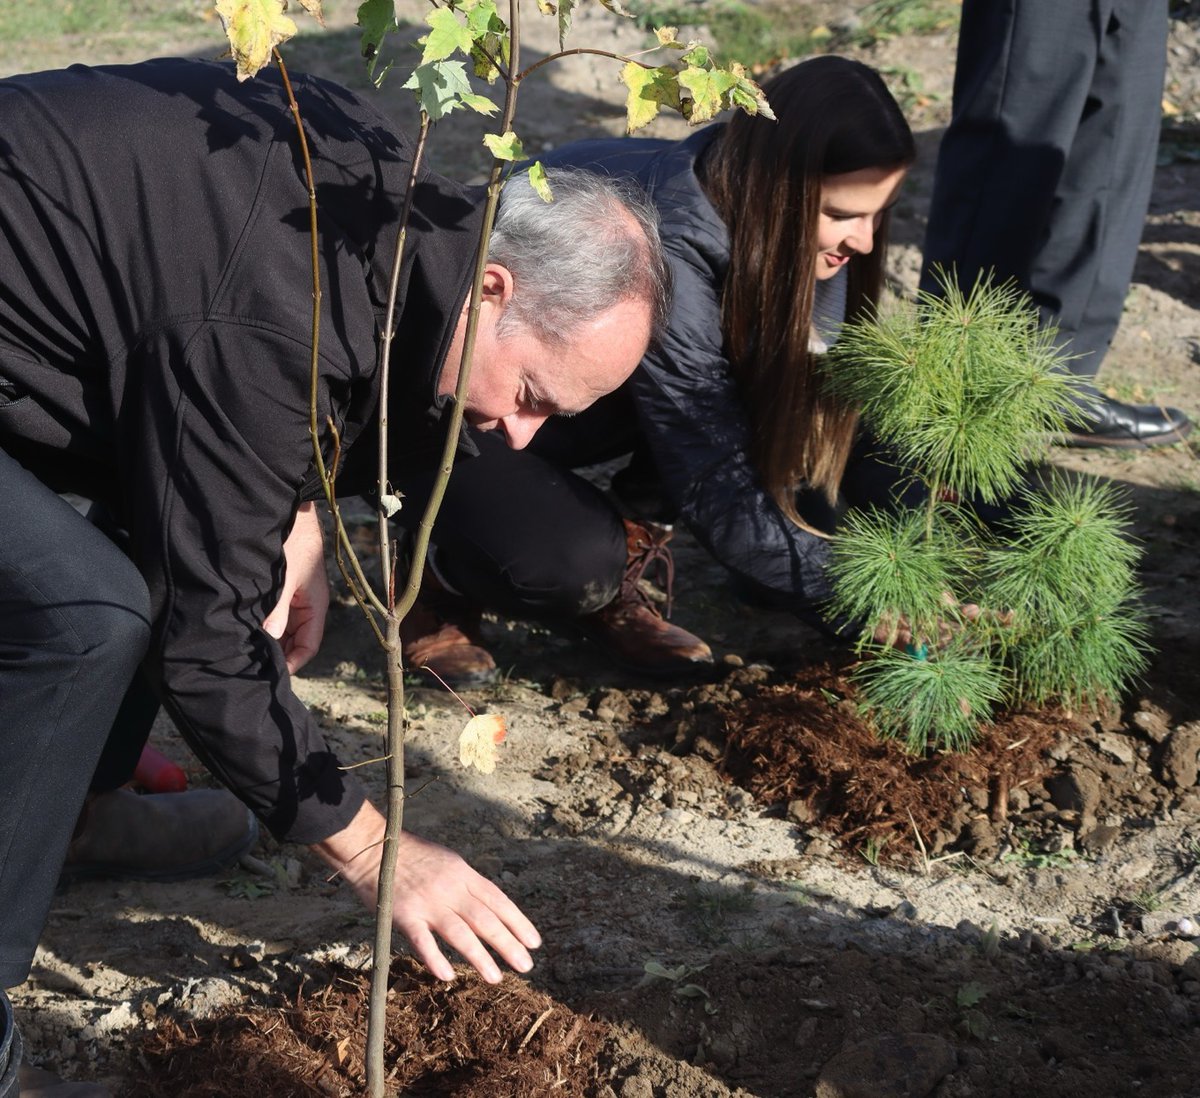 Happy #EarthDay Ontario! Today I’m reflecting on the time I planted trees with @Andrea_Khanjin in honour of the wetland restoration project for #Pickering! Our government will continue to ensure a safe, healthy and clean environment now and for future generations.